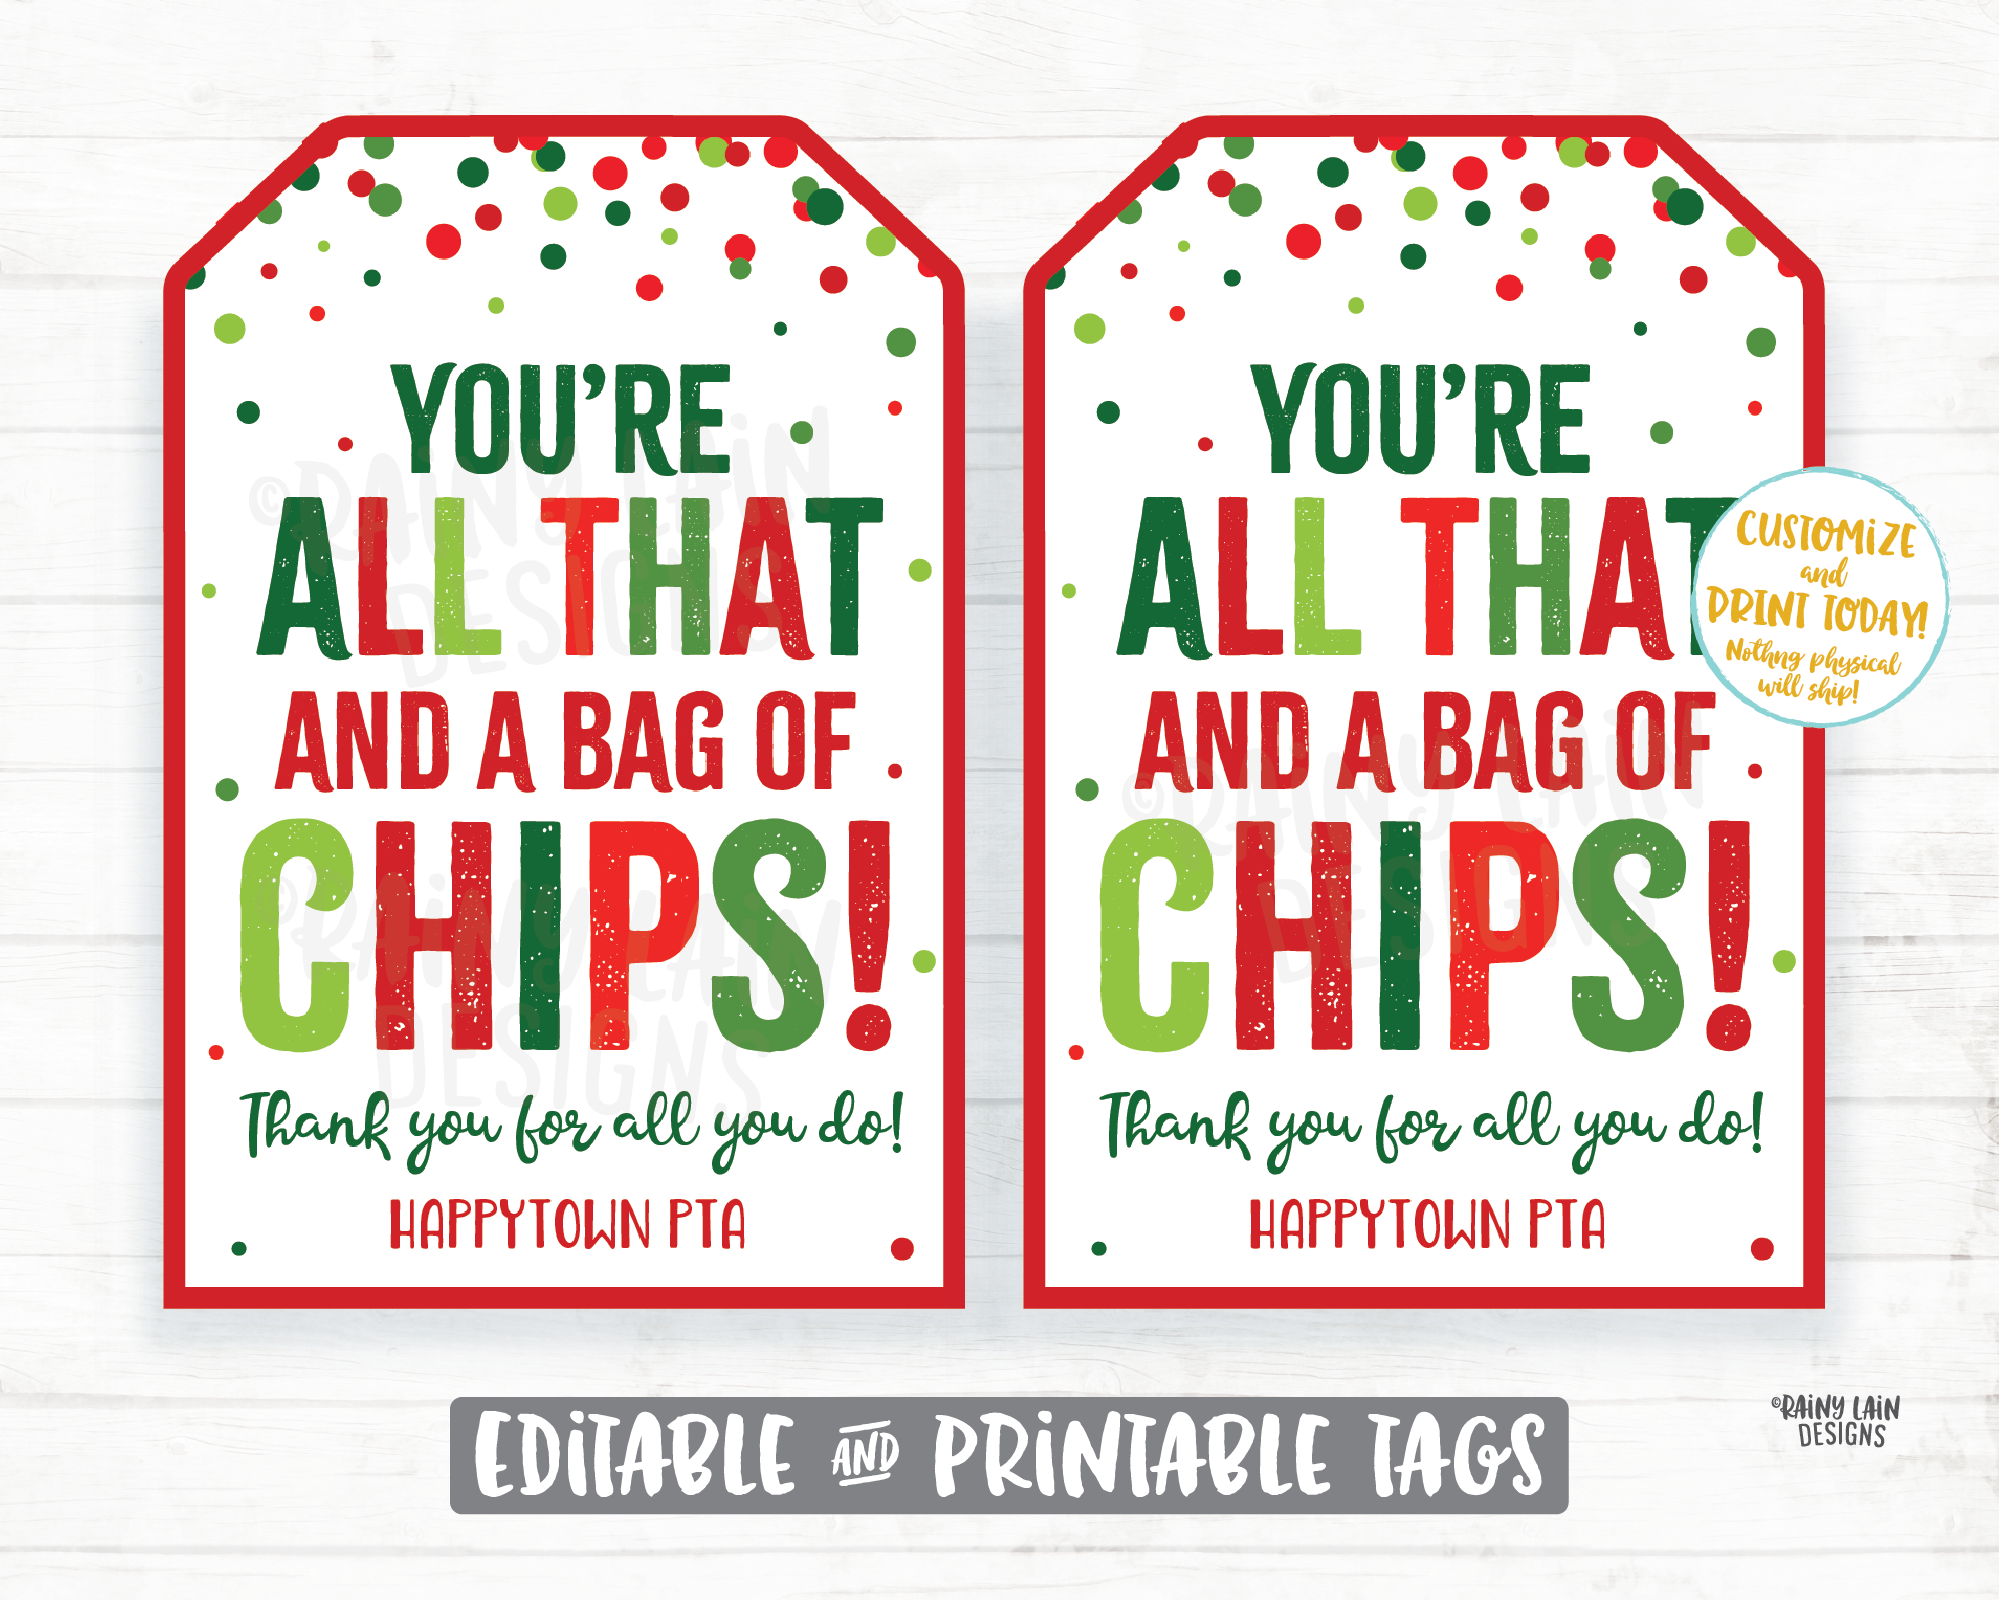 you-re-all-that-and-a-bag-of-chips-tag-christmas-gift-tag-employee-app-rainy-lain-designs-llc